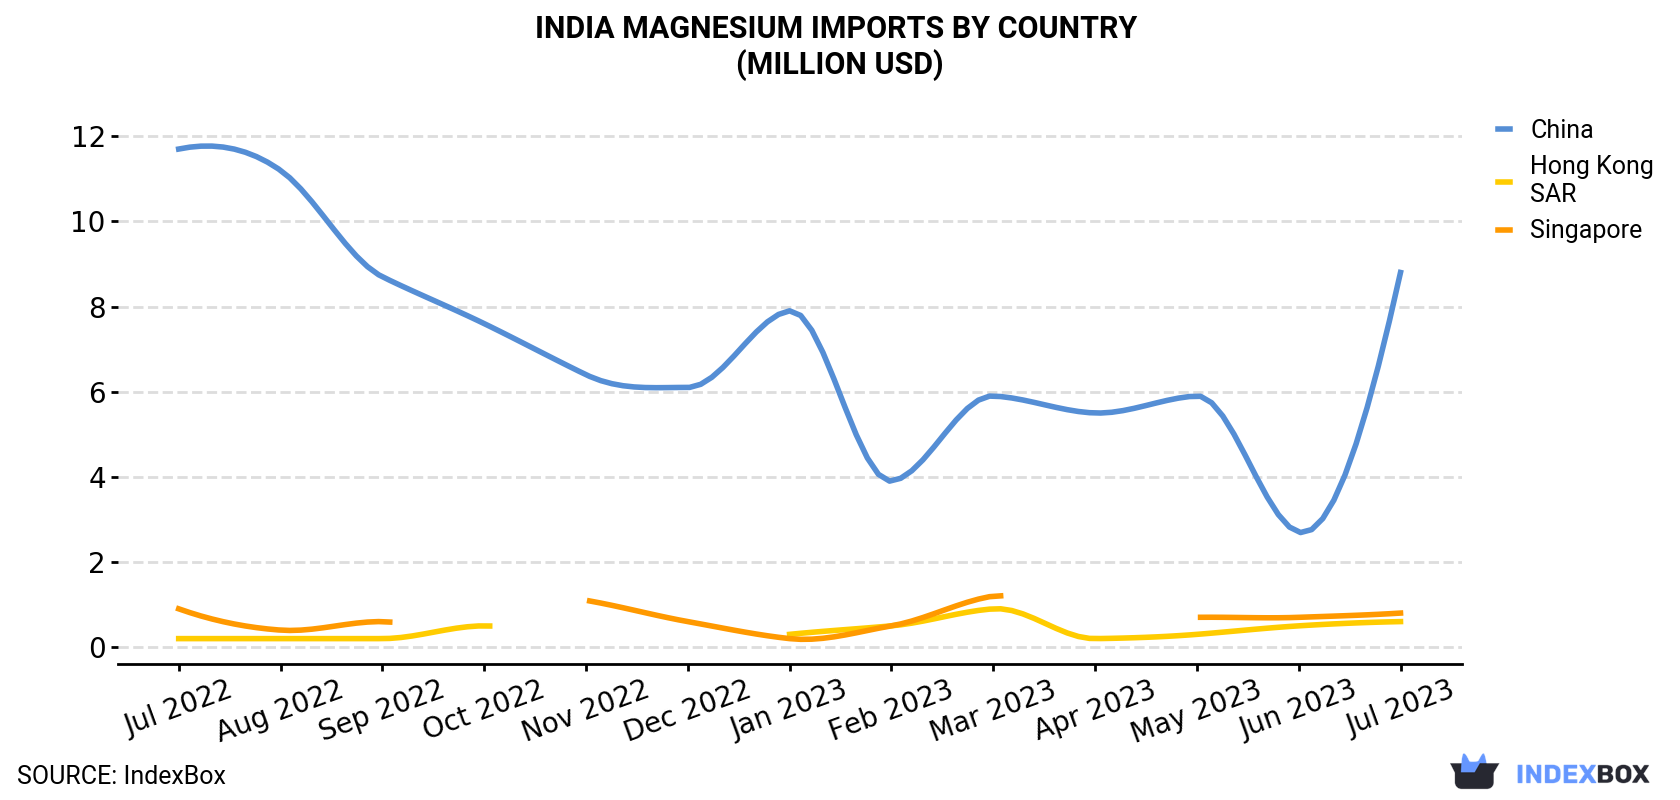 India Magnesium Imports By Country (Million USD)